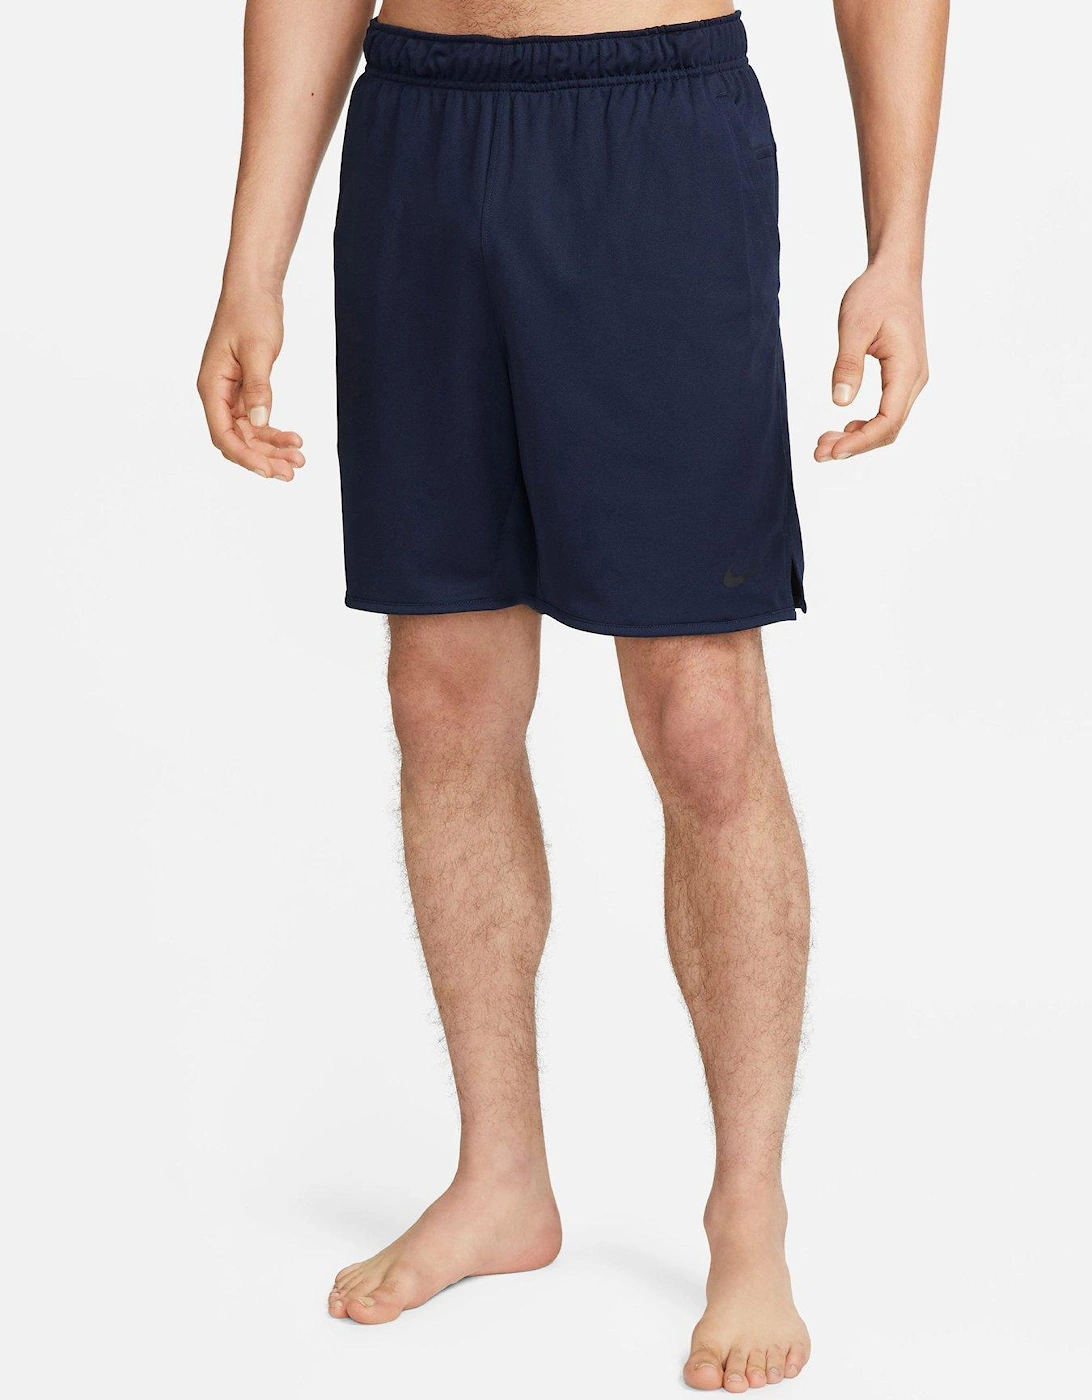 Train Totality 7 Inch Unlined Knit Shorts - Navy, 6 of 5